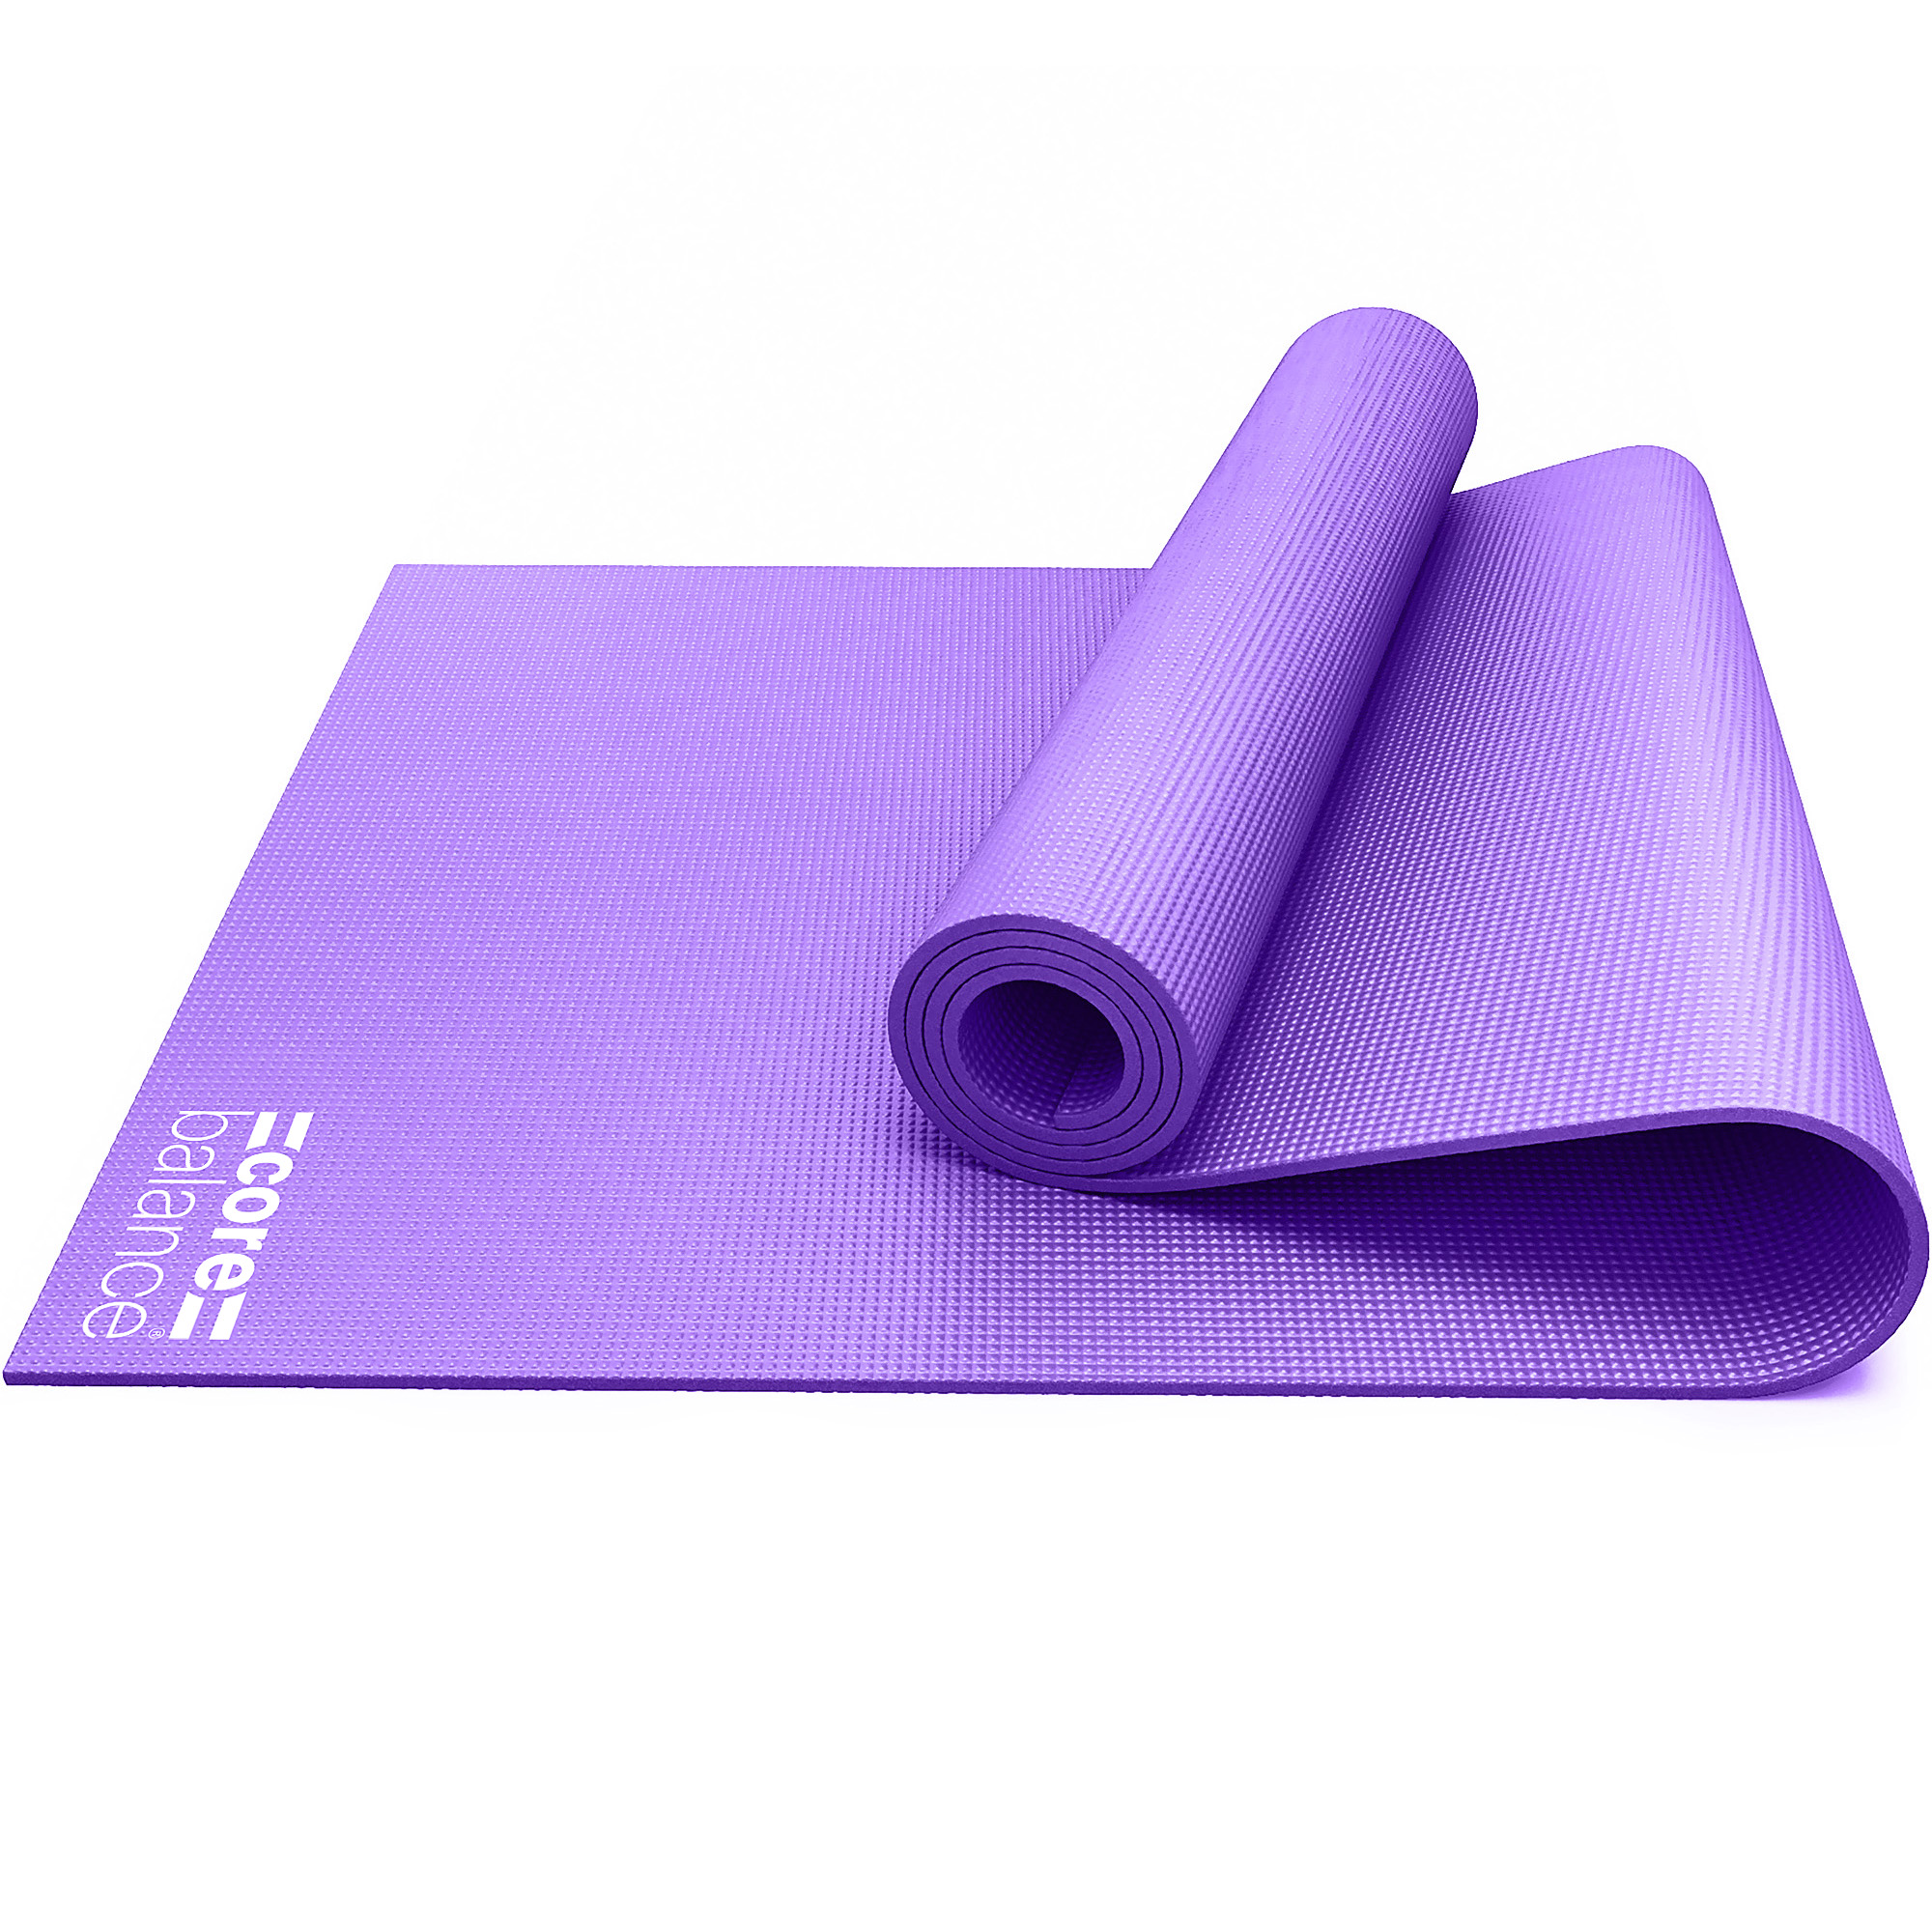 Yoga Exercise Mat Foam 6mm Non Slip Pilates Gym Fitness Roll Up Carry Strap